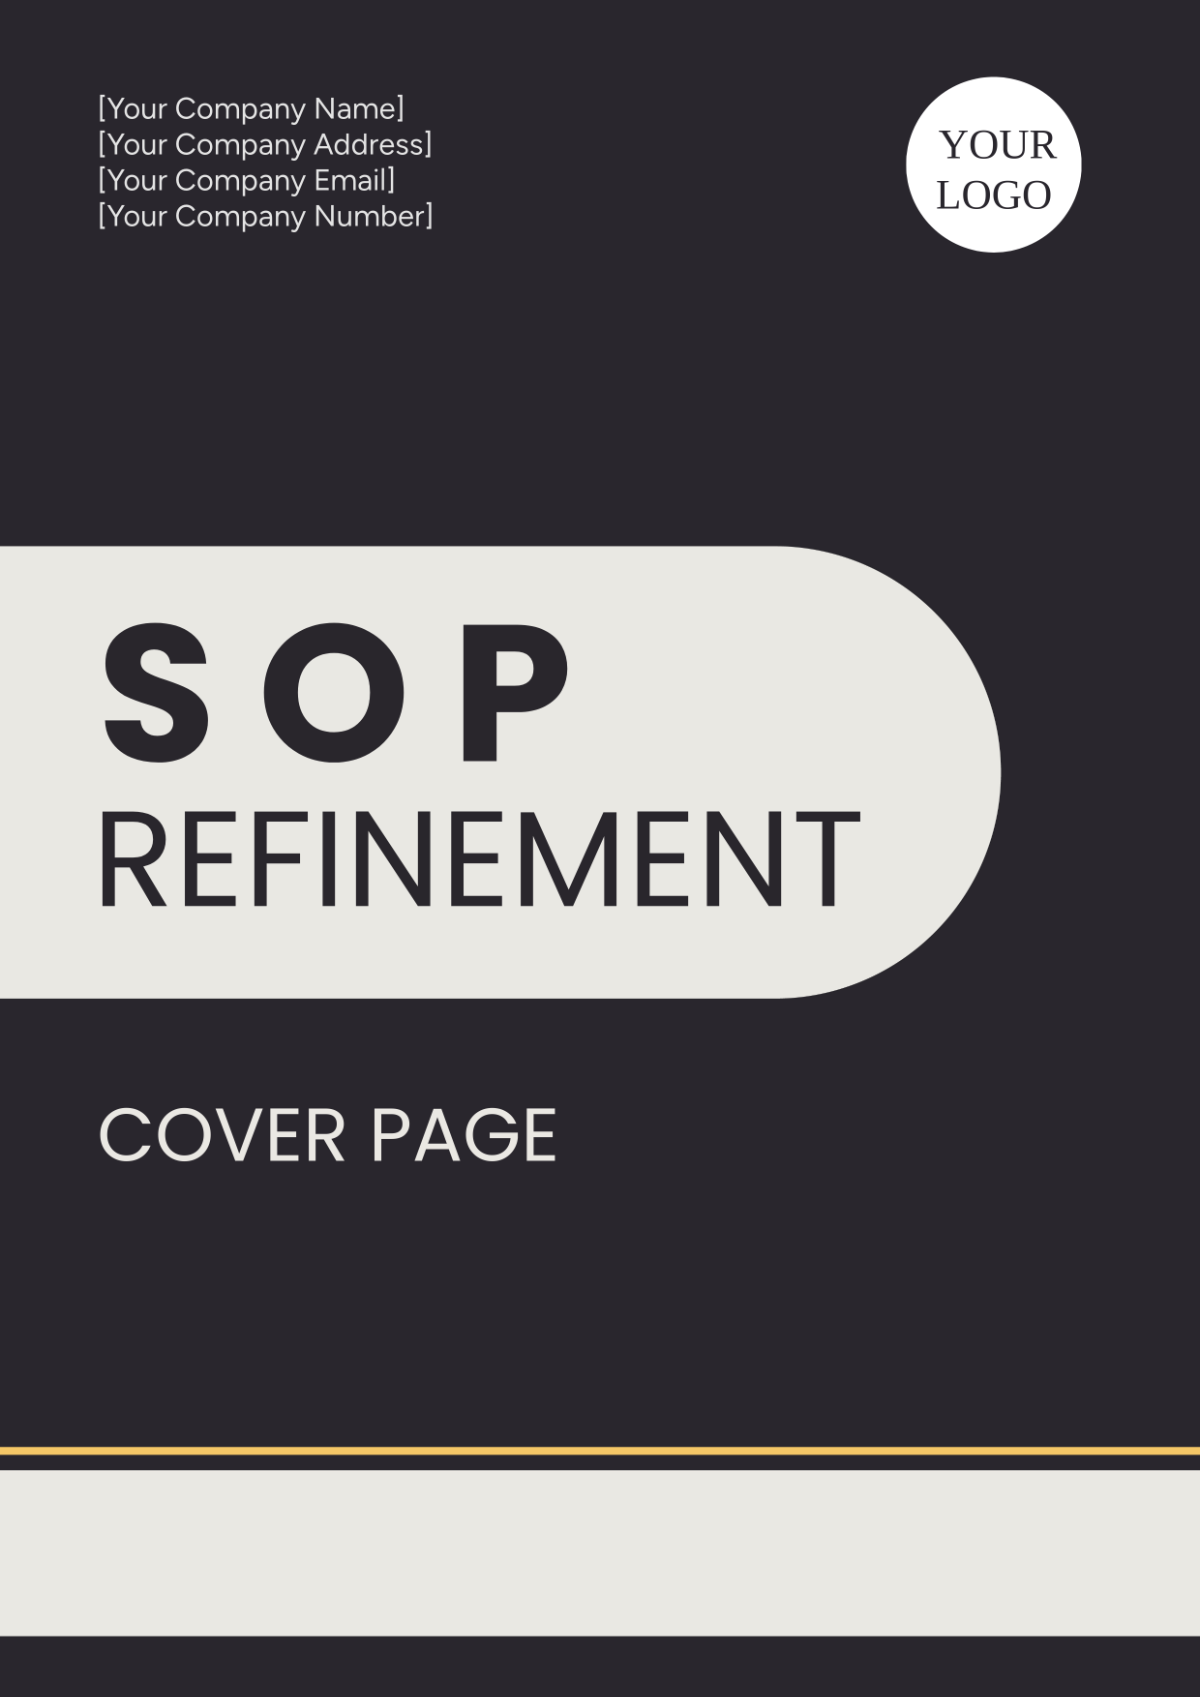 SOP Refinement Cover Page